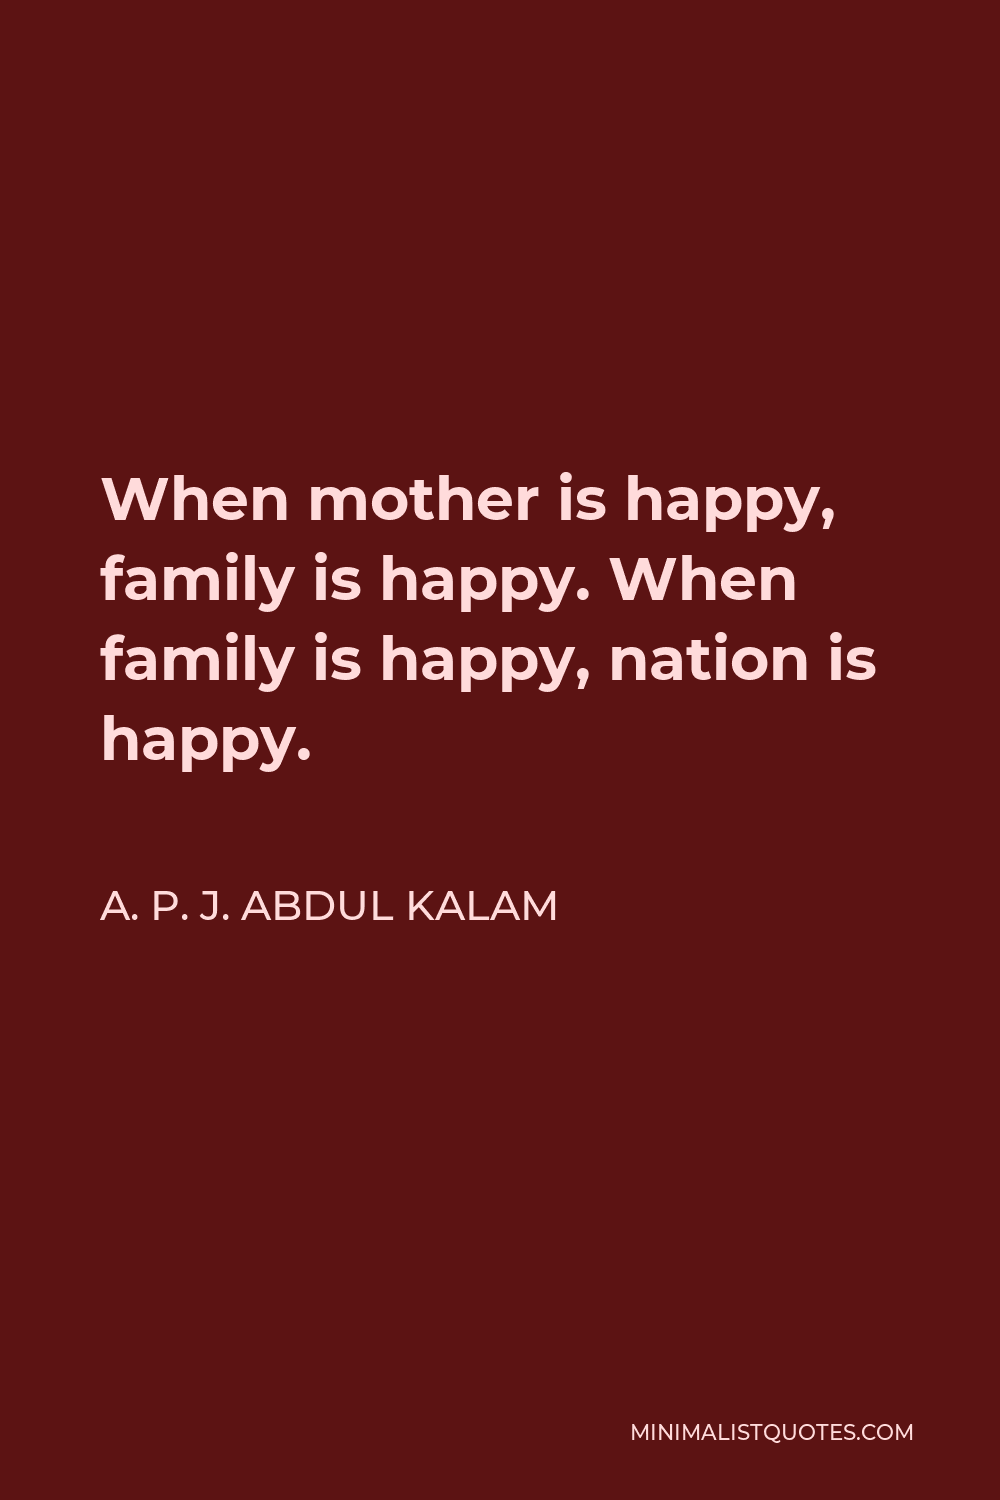 A. P. J. Abdul Kalam Quote - When mother is happy, family is happy. When family is happy, nation is happy.